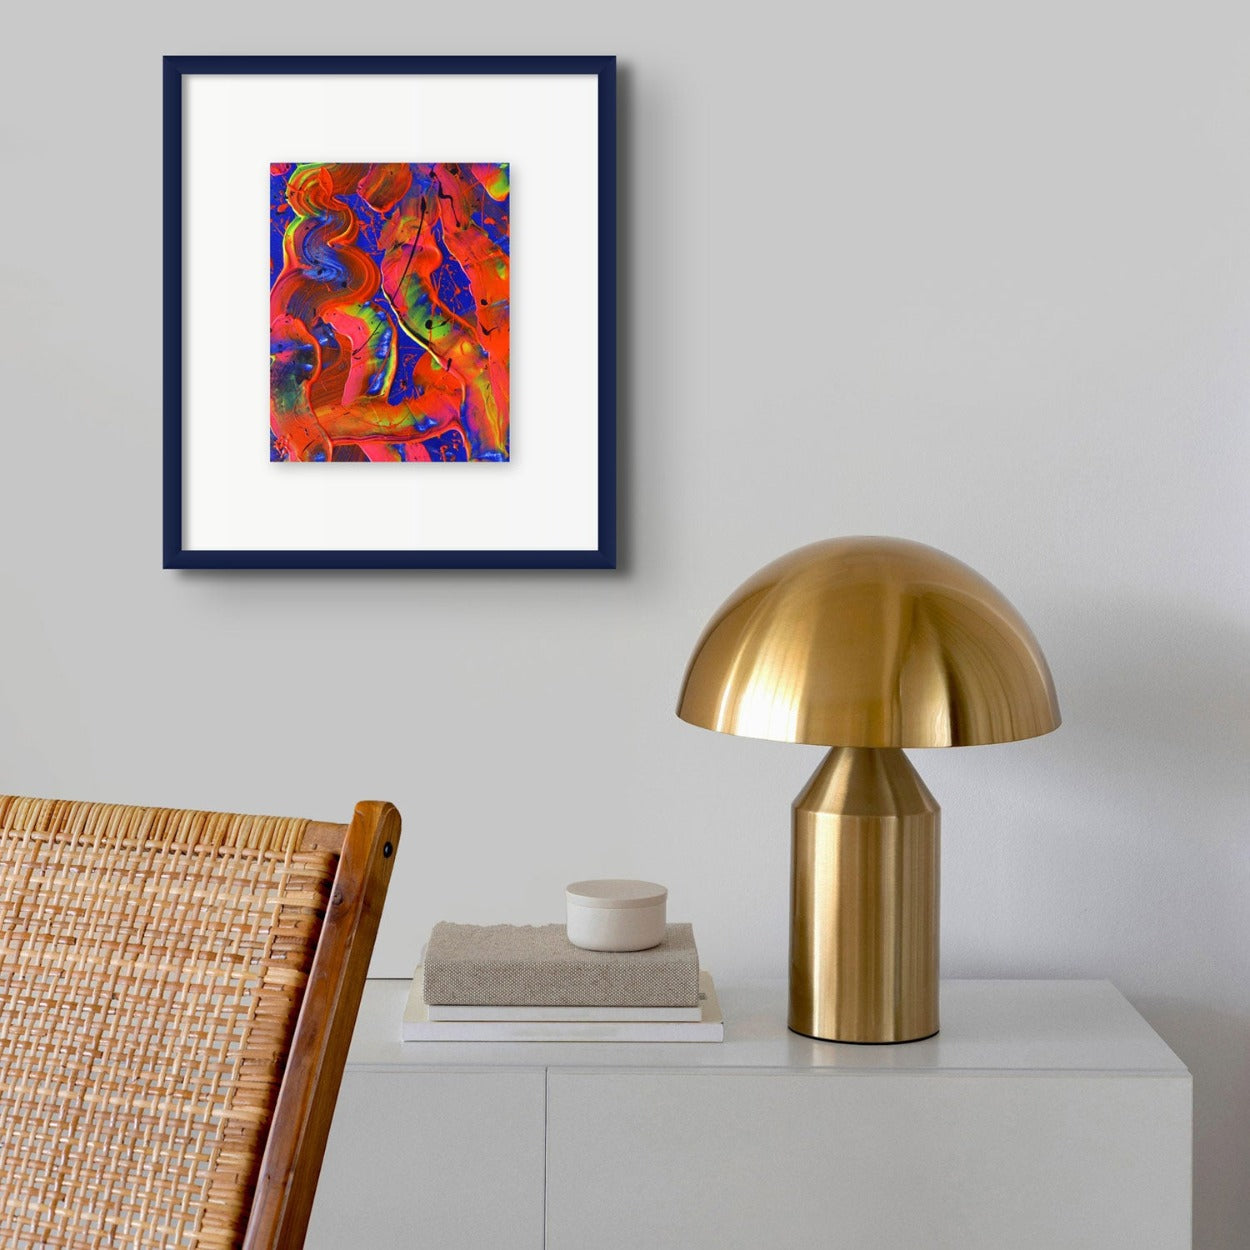 Little Luxuries I , original abstract art by Brigdet Bradley seen in situ on wall in navy frame with gold lamp and rattan chair